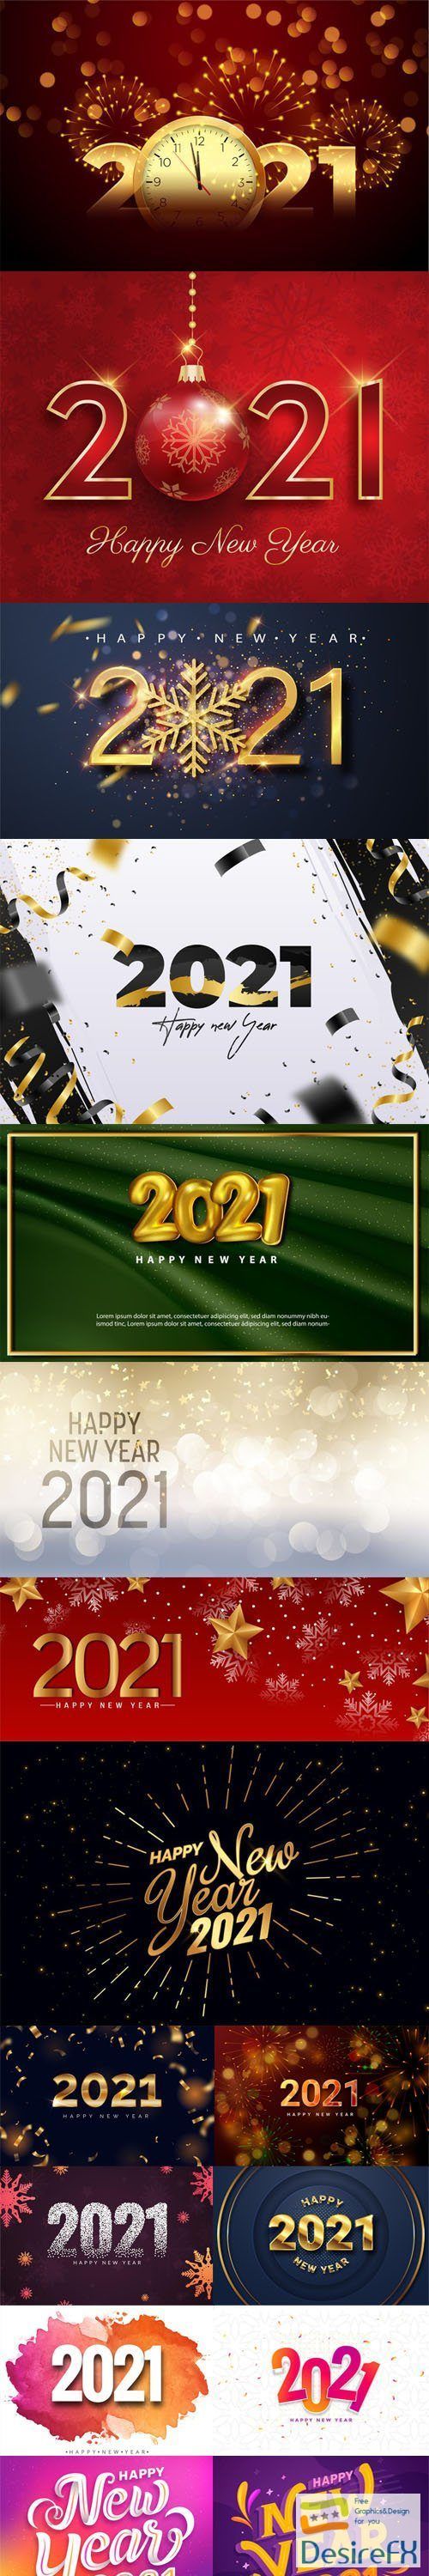 16 Happy New Year 2021 Backgrounds & Lettering Templates in Vector